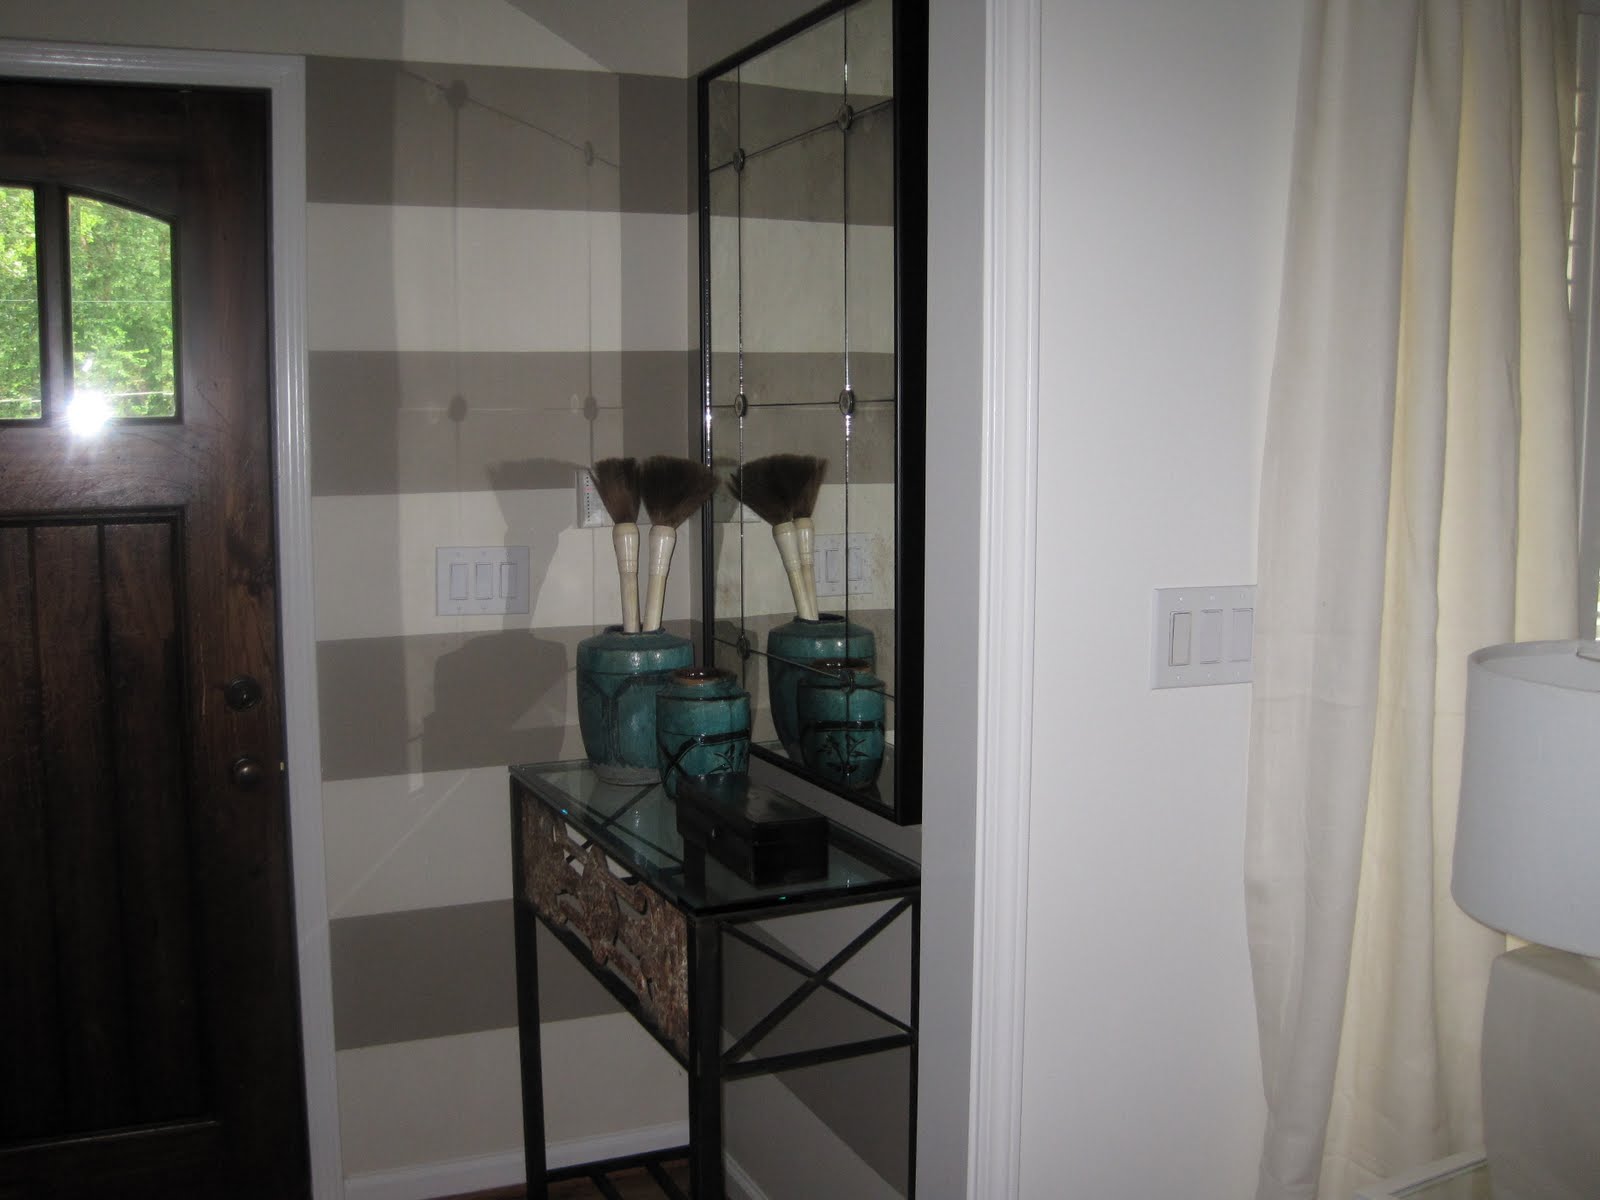 Building Storage Shelves in Guest Closet - Cynthia Banessa